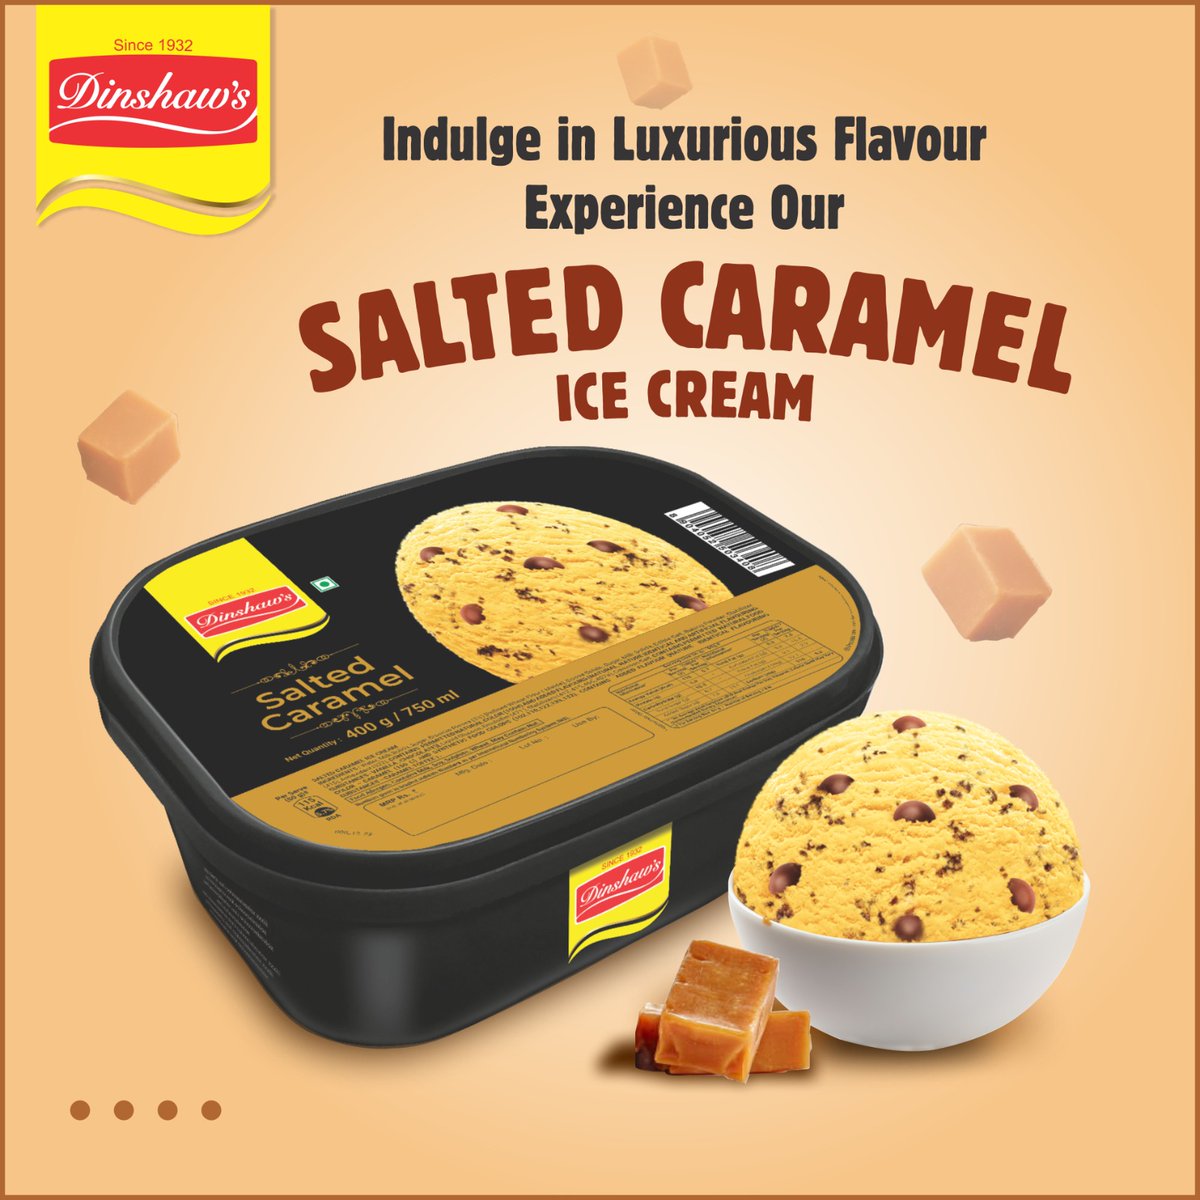 Satisfy Your Sweet & Salty Cravings with our Salted Caramel Ice Cream

#Dinshaws4UAlways #icecream #saltedcaramel #saltysweet #summer #newlaunch #different #musttry #flavourful #luxury #richness #creamy #madewithmilk #milkicecream #MadeWithLove #special #treats #enjoy #delicious